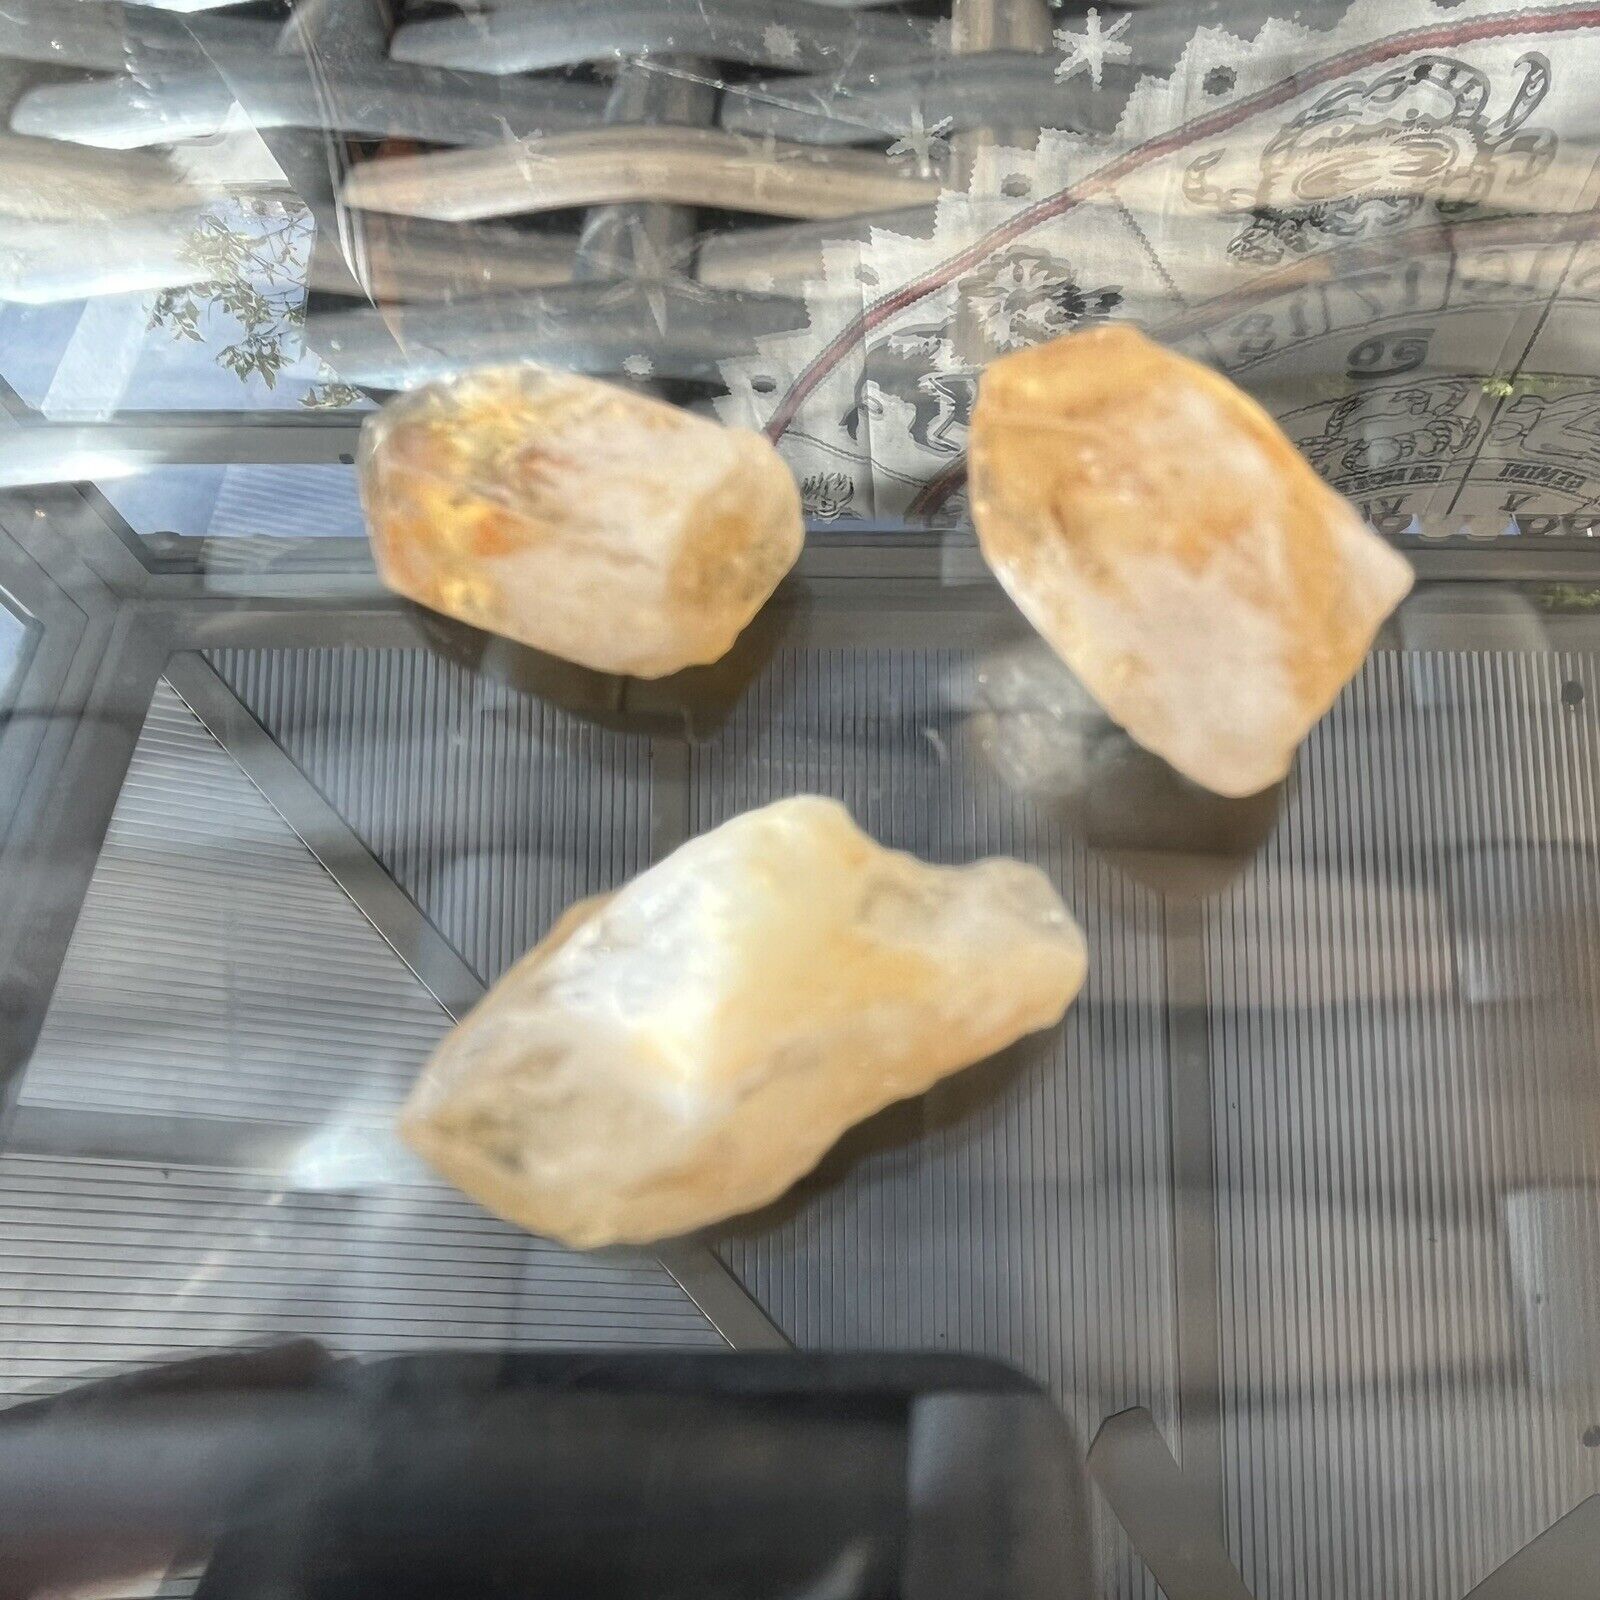 3x Citrine Crystal Shards (15g Total Weight)